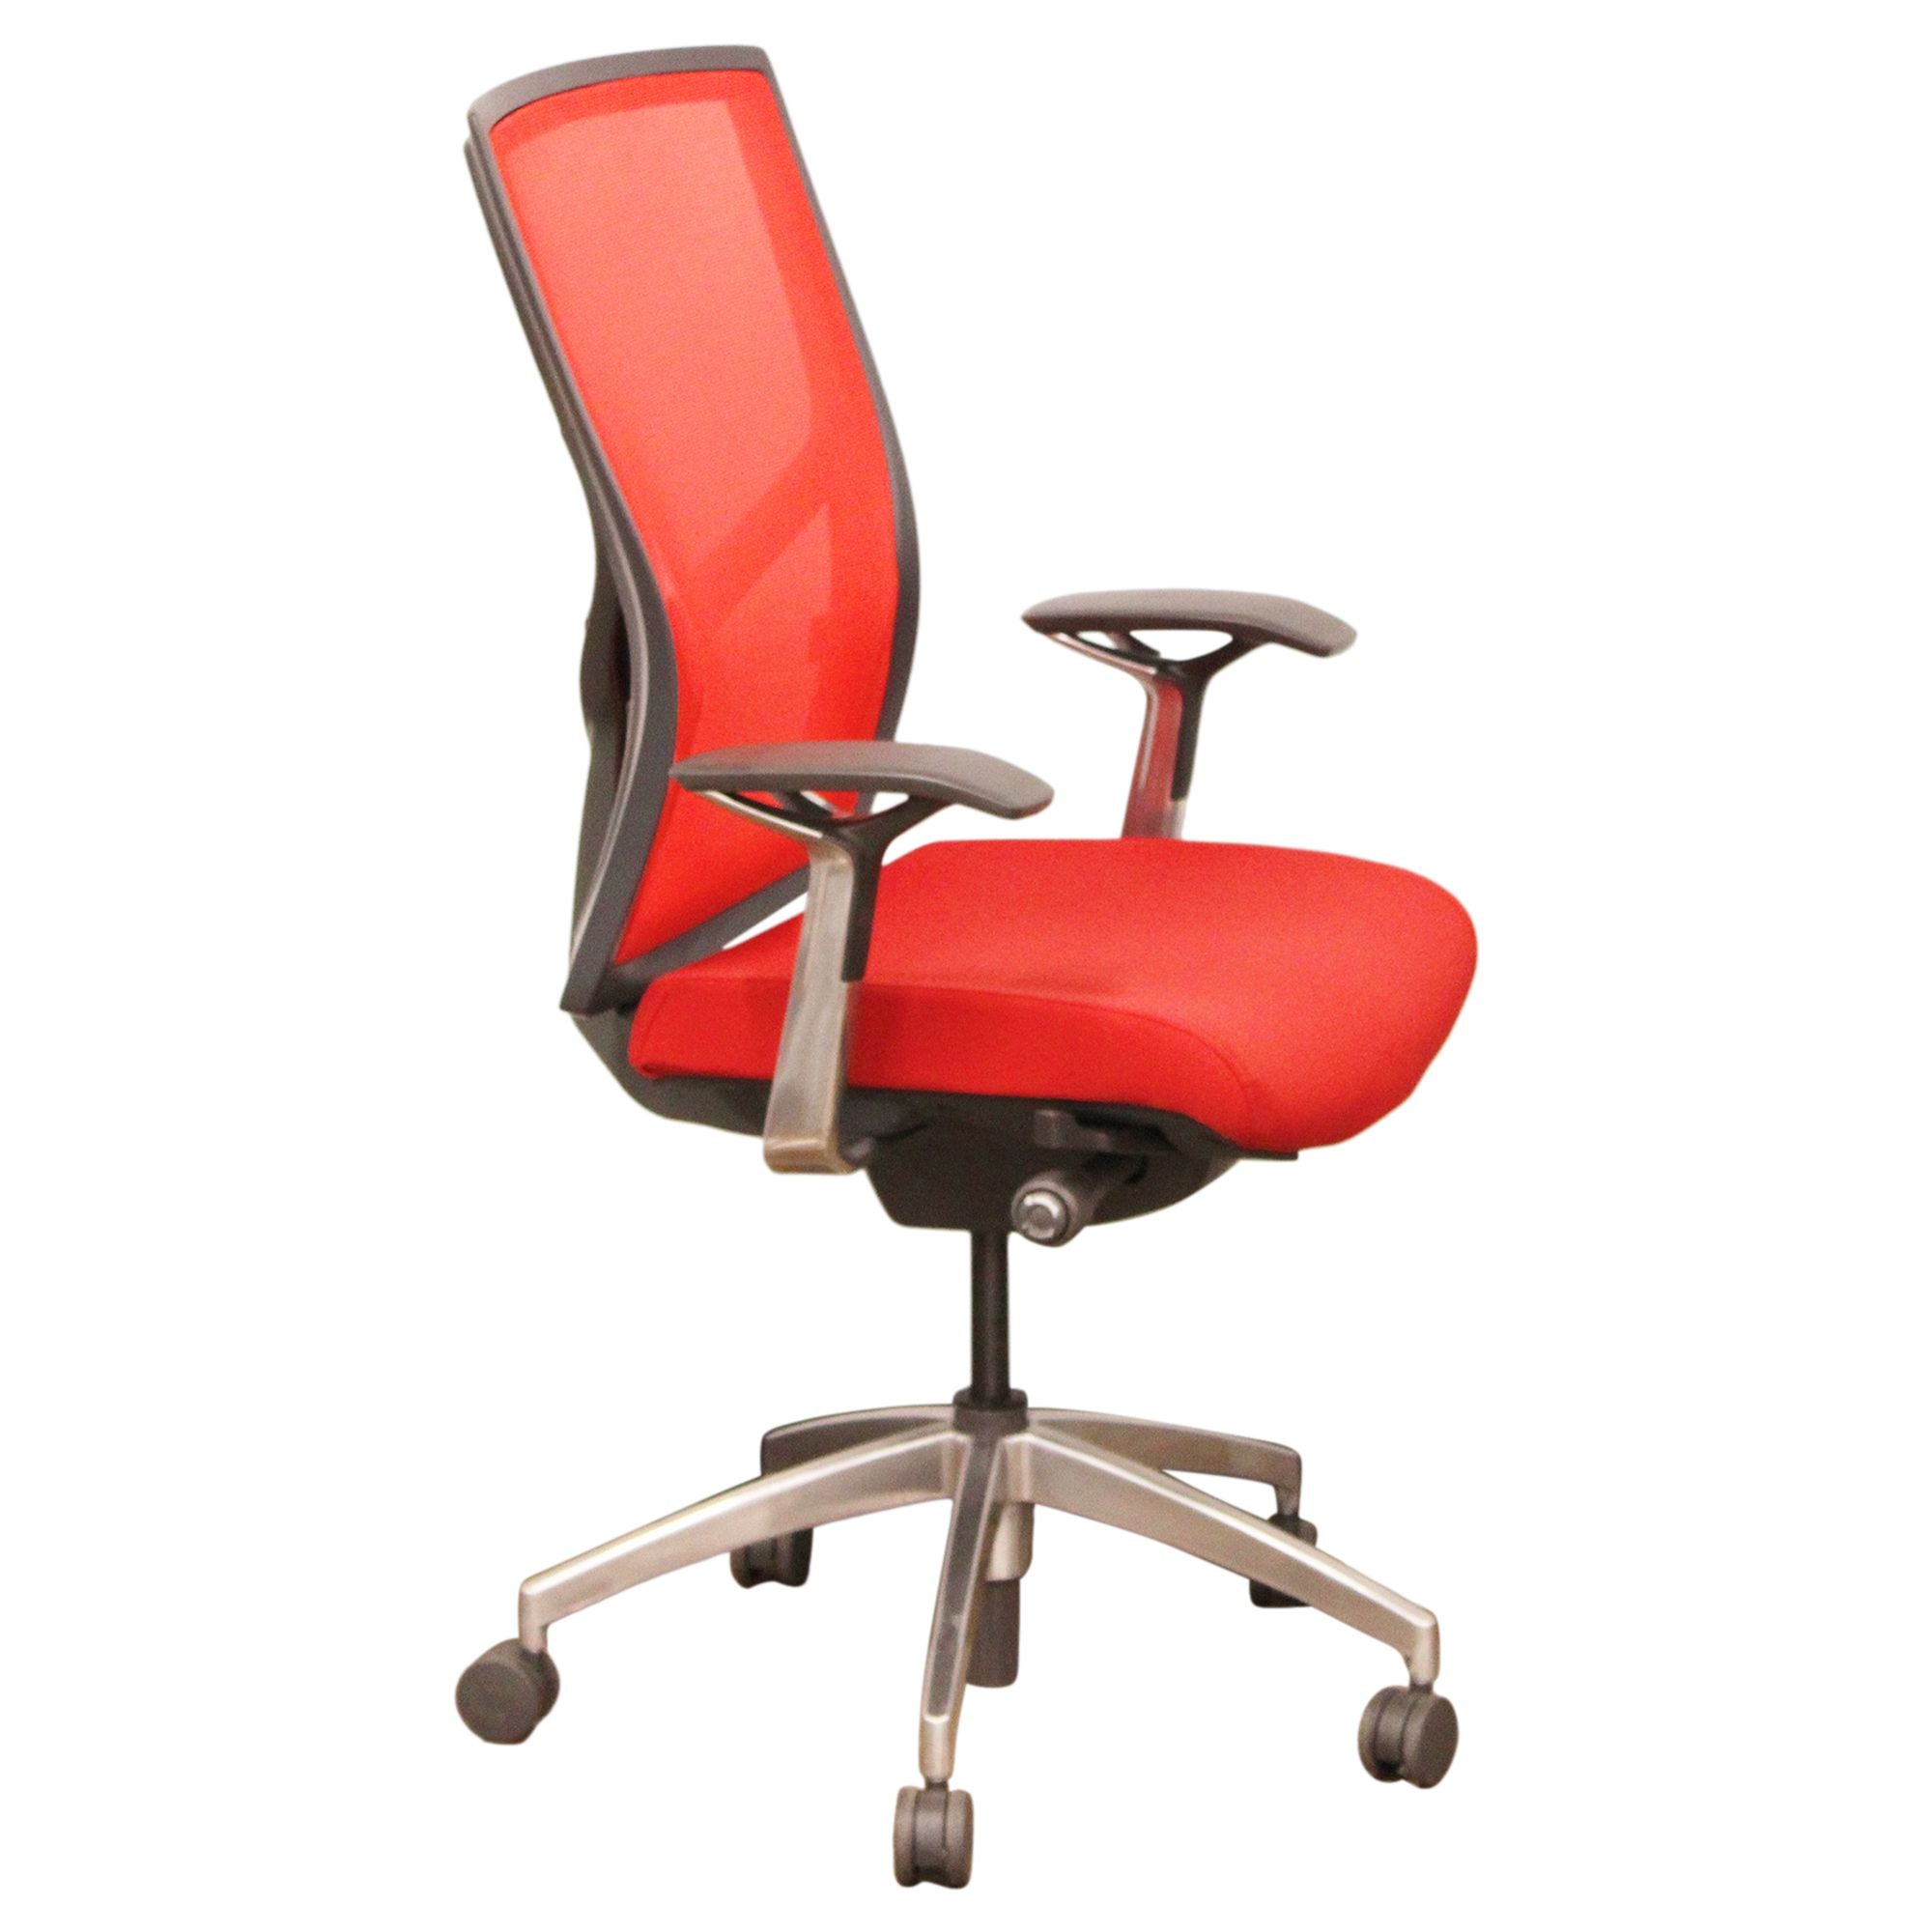 Sitonit Torsa Task Chair Red